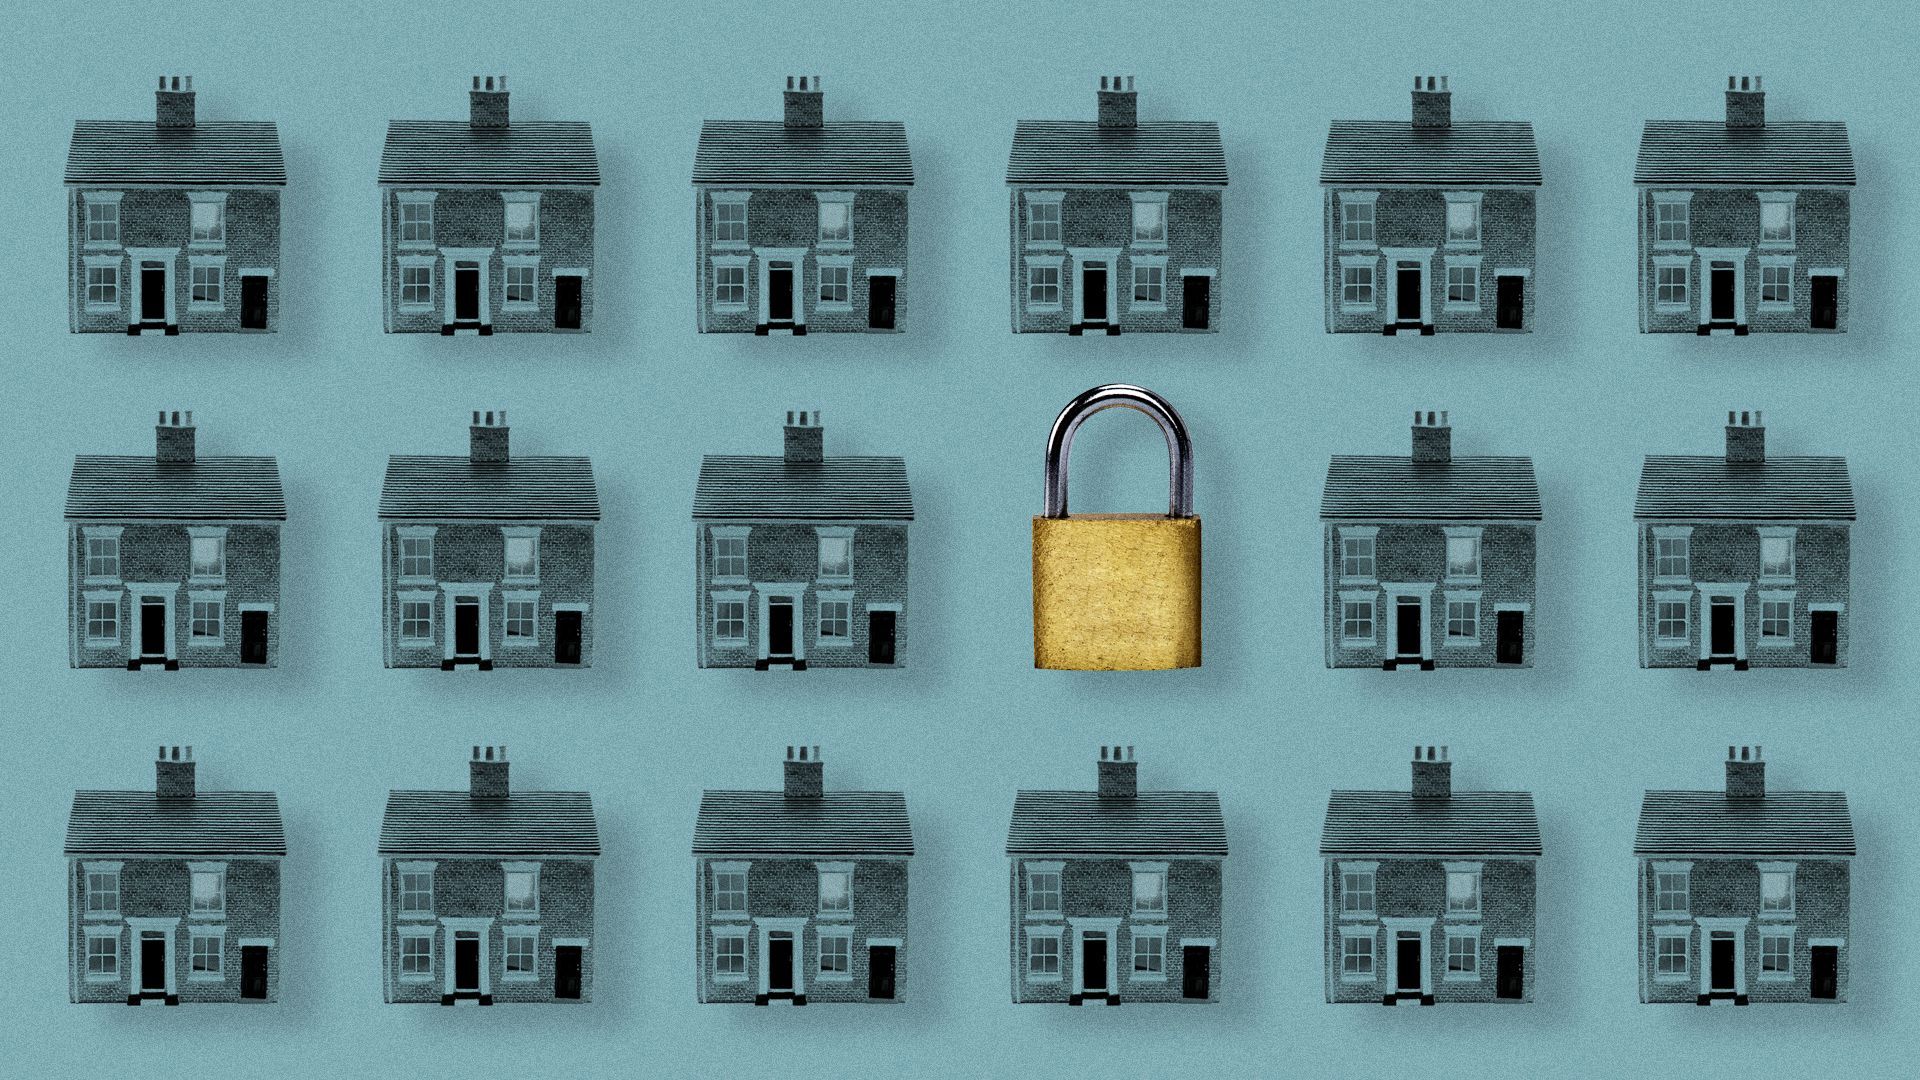 Illustration of three rows of identical houses on a blue background, with one of the houses replaced with a lock.